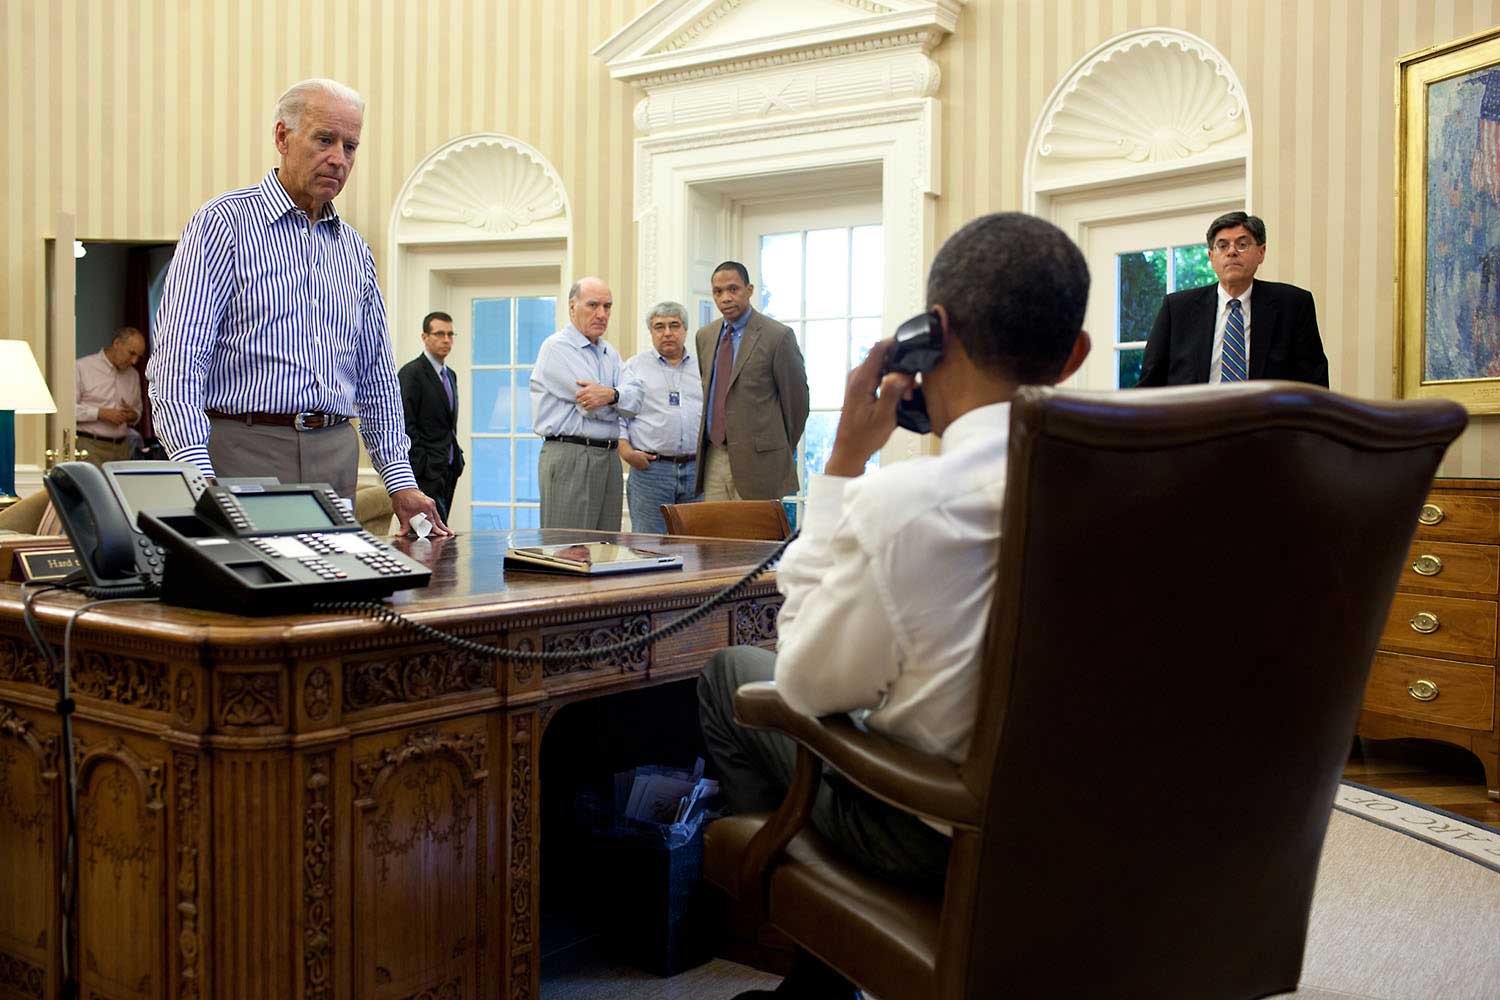 The Vice President and other staff watch and listen as the President talks on the phone in the Oval Office with Senate Majority Leader Harry Reid during the debt limit and deficit discussions, July 31, 2011.